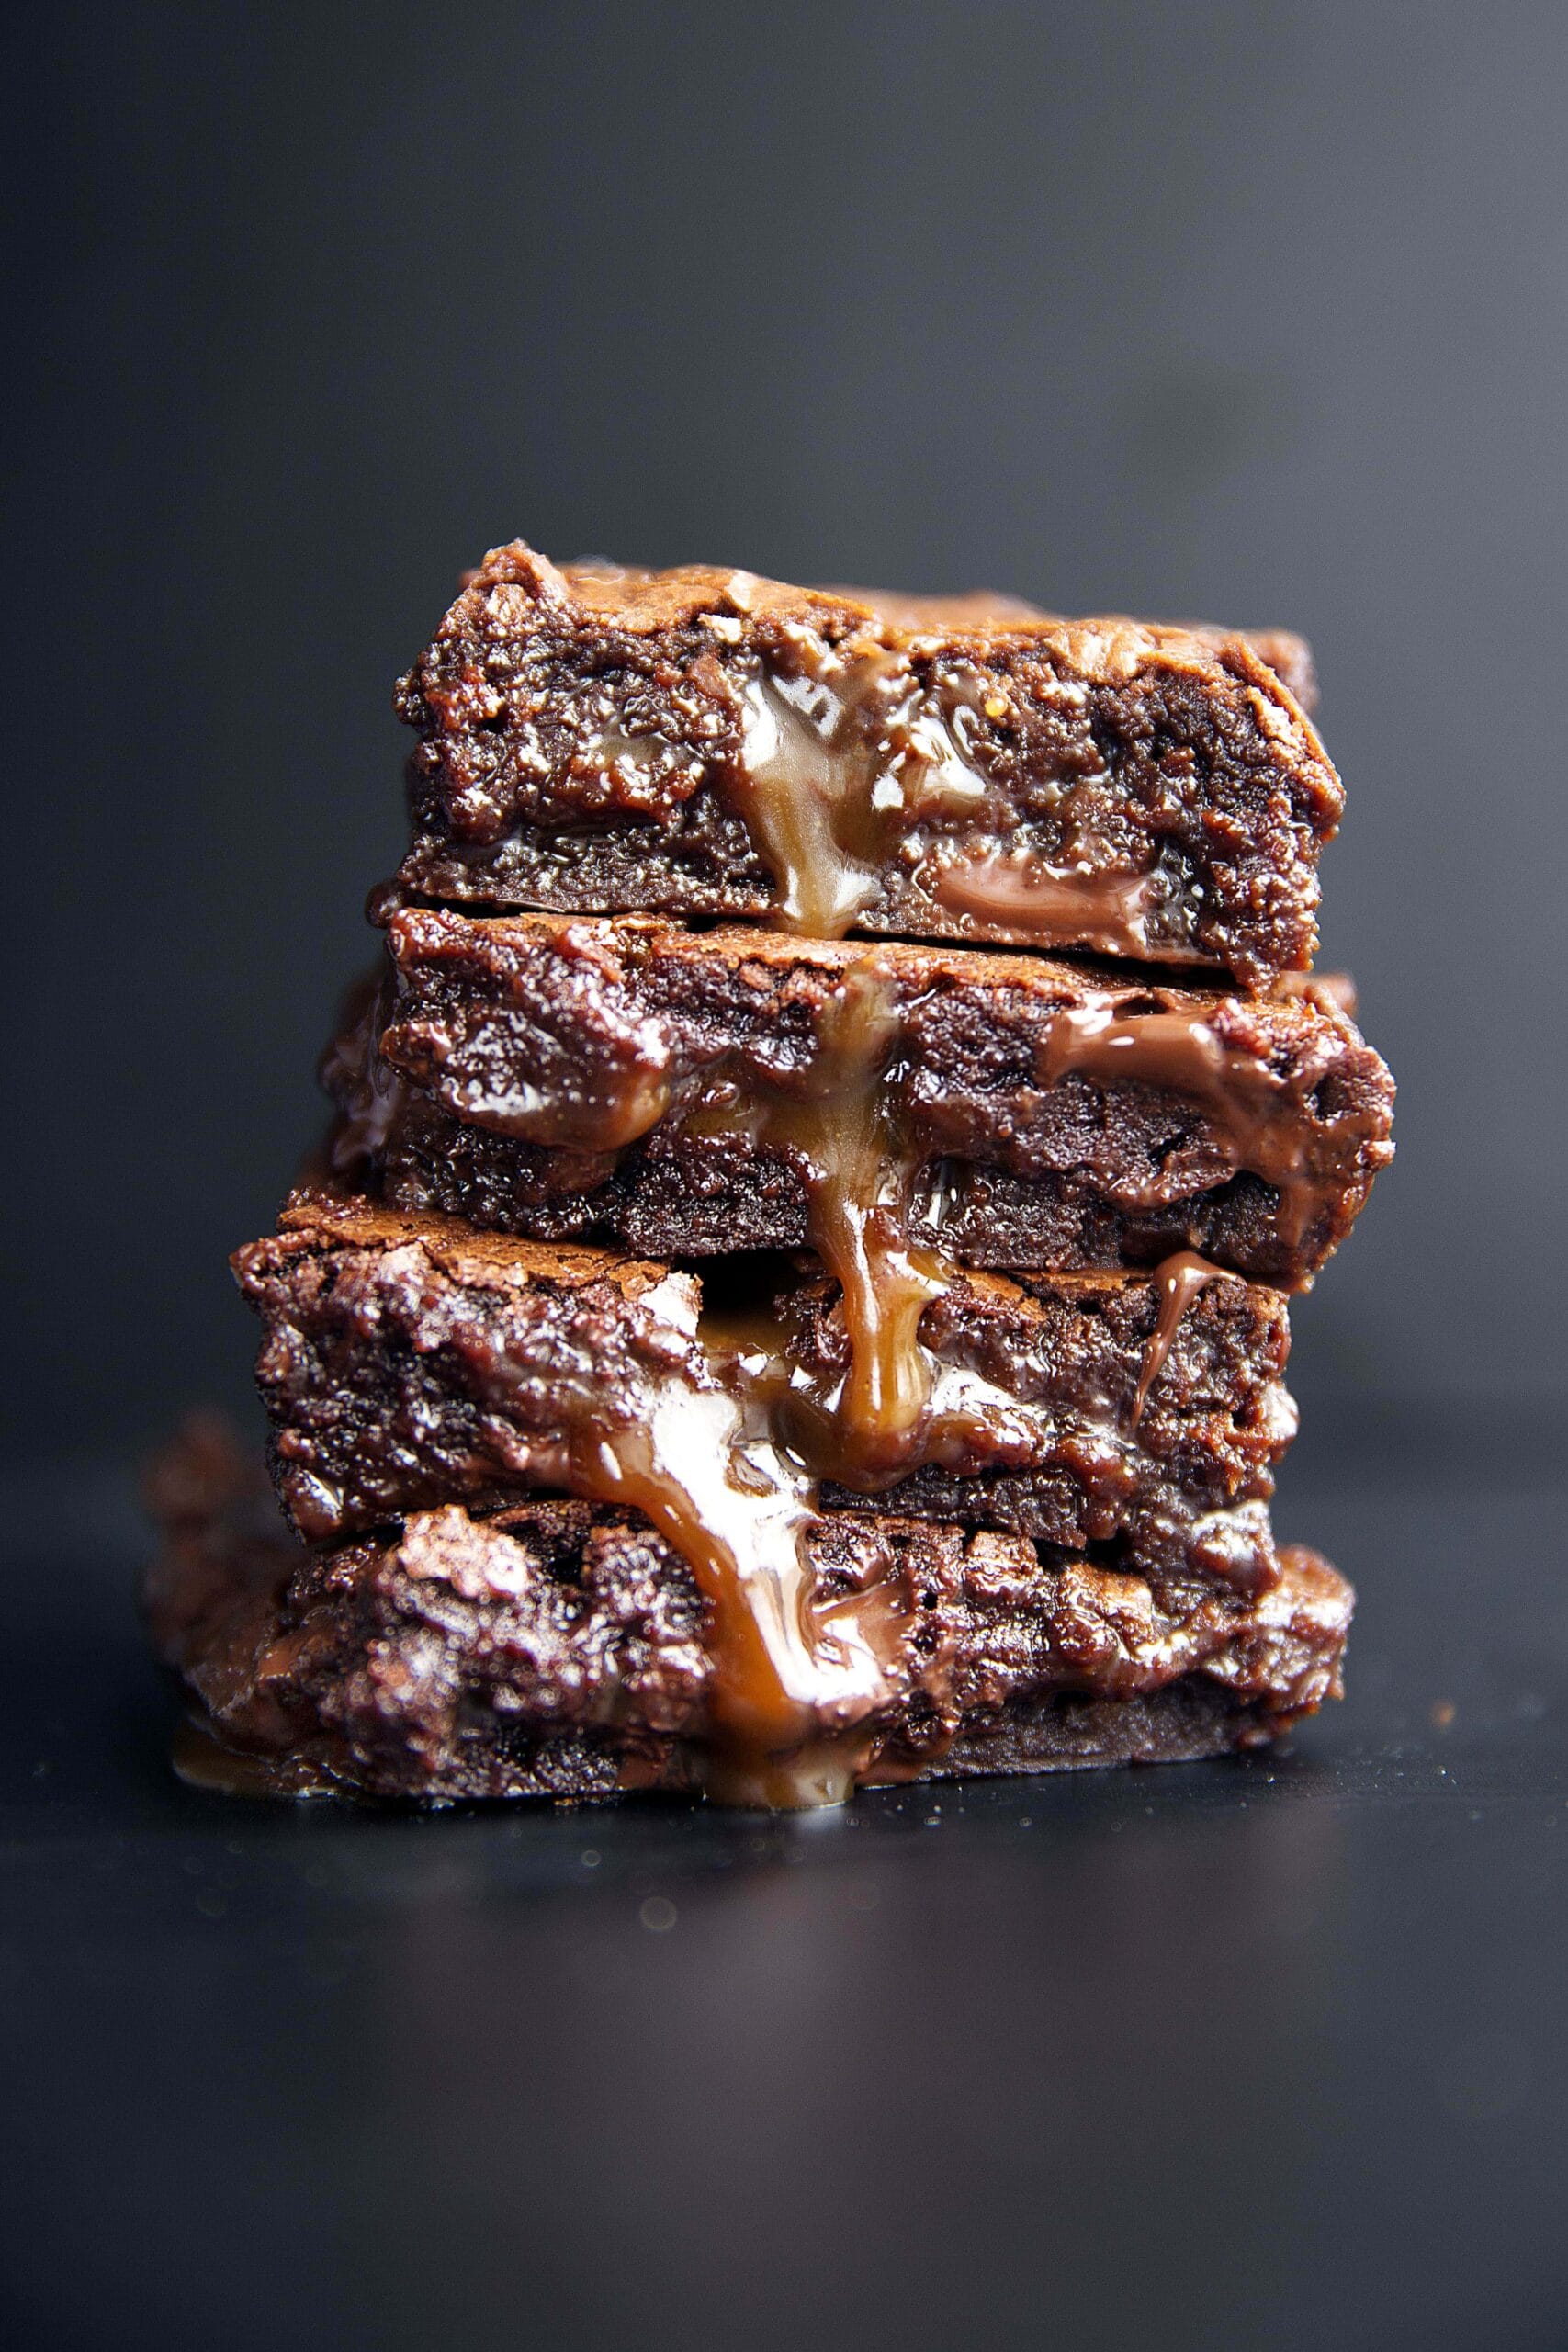 The fudgiest of brownies swirled with homemade salted caramel. One bite and you're in heaven!